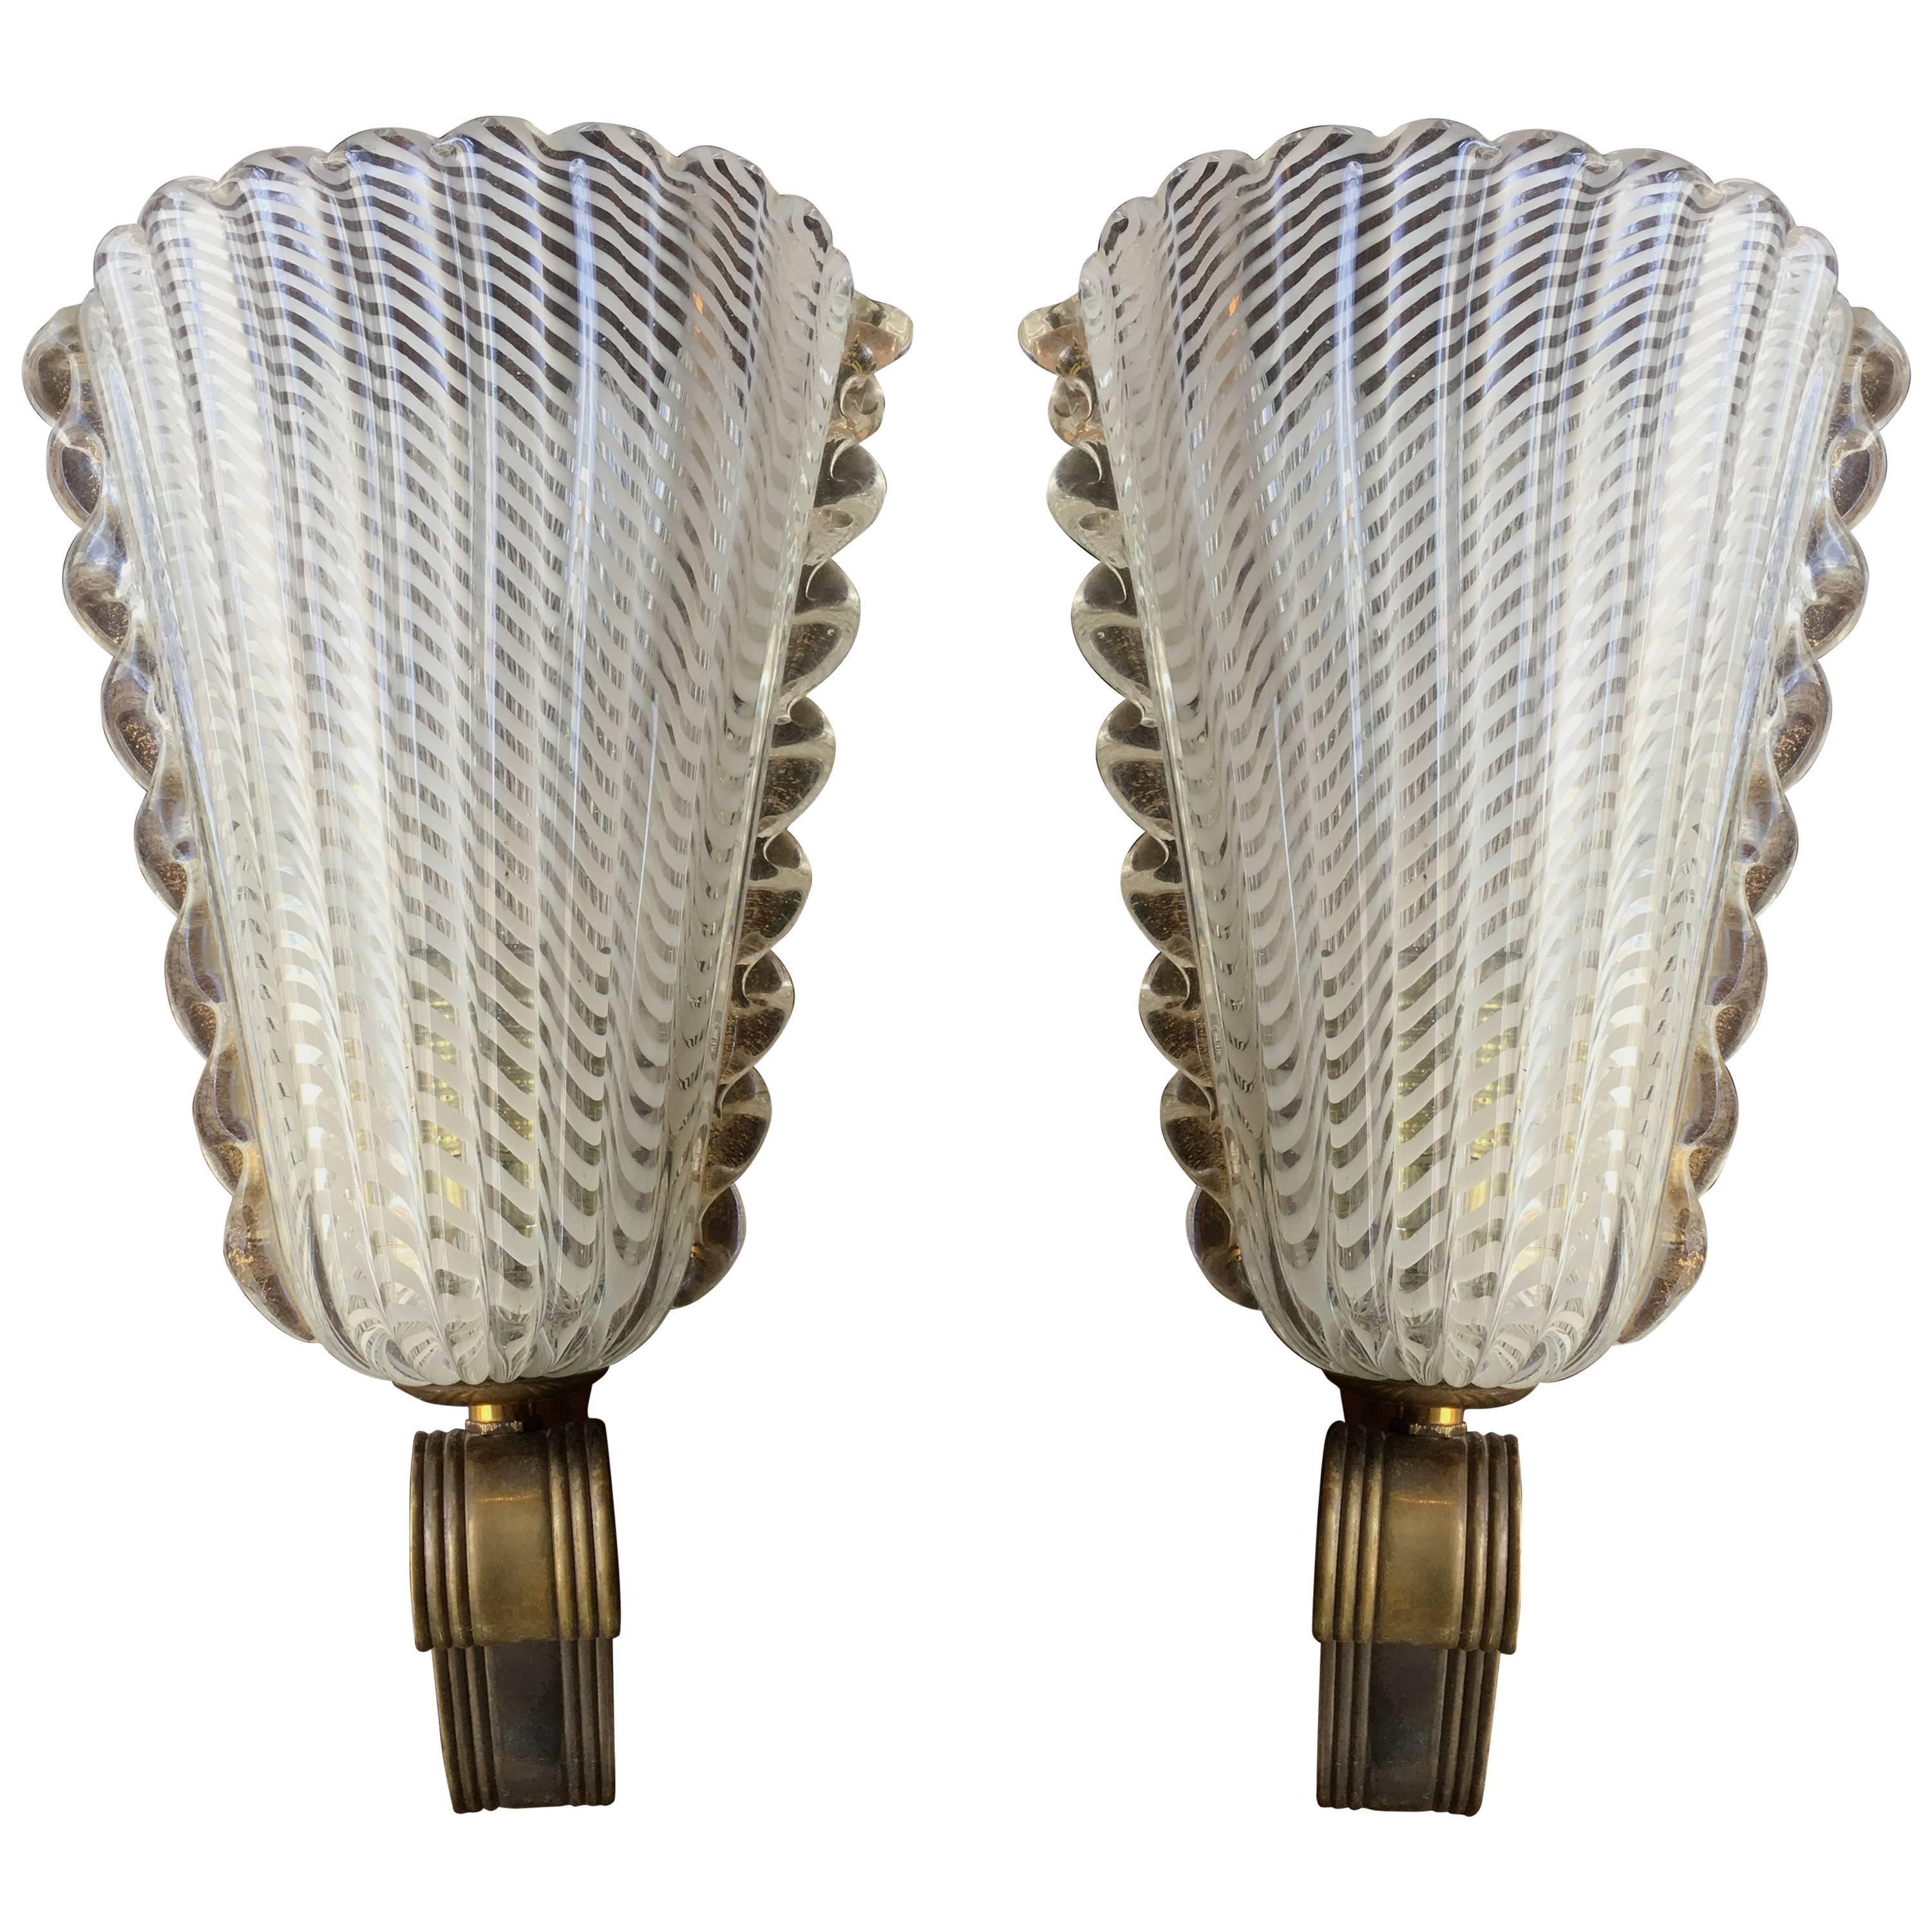 Pair of Murano Sconces by Barovier & Toso, 1940s